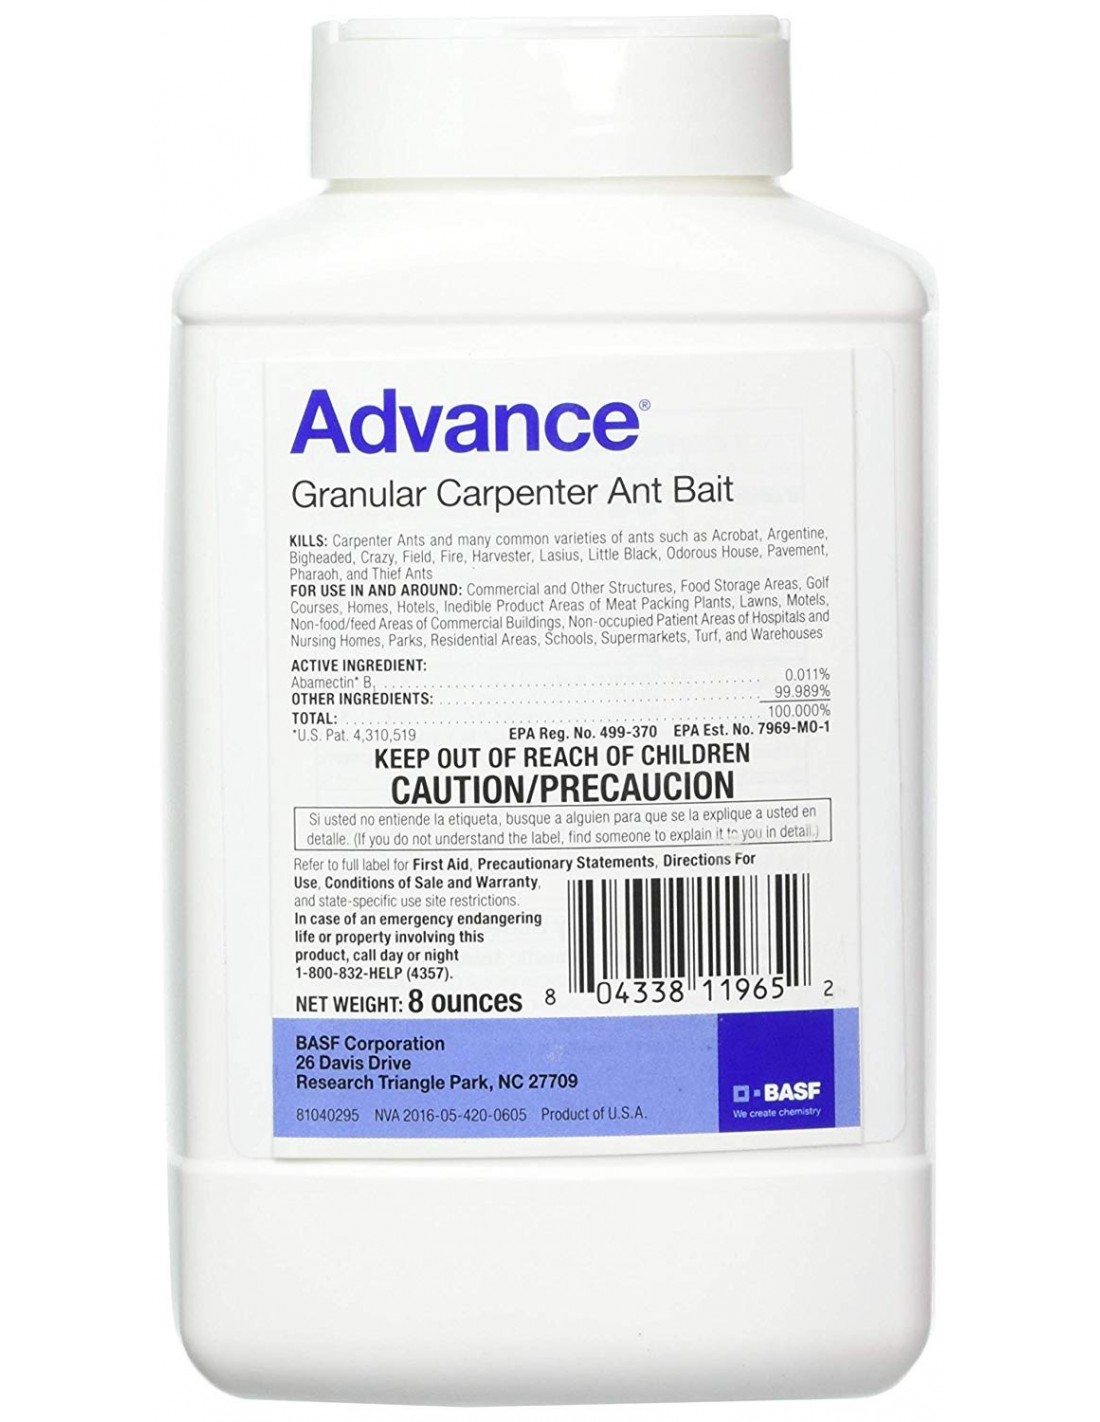 What is the shelf life of unopened Advance Carpenter Ant Bait?